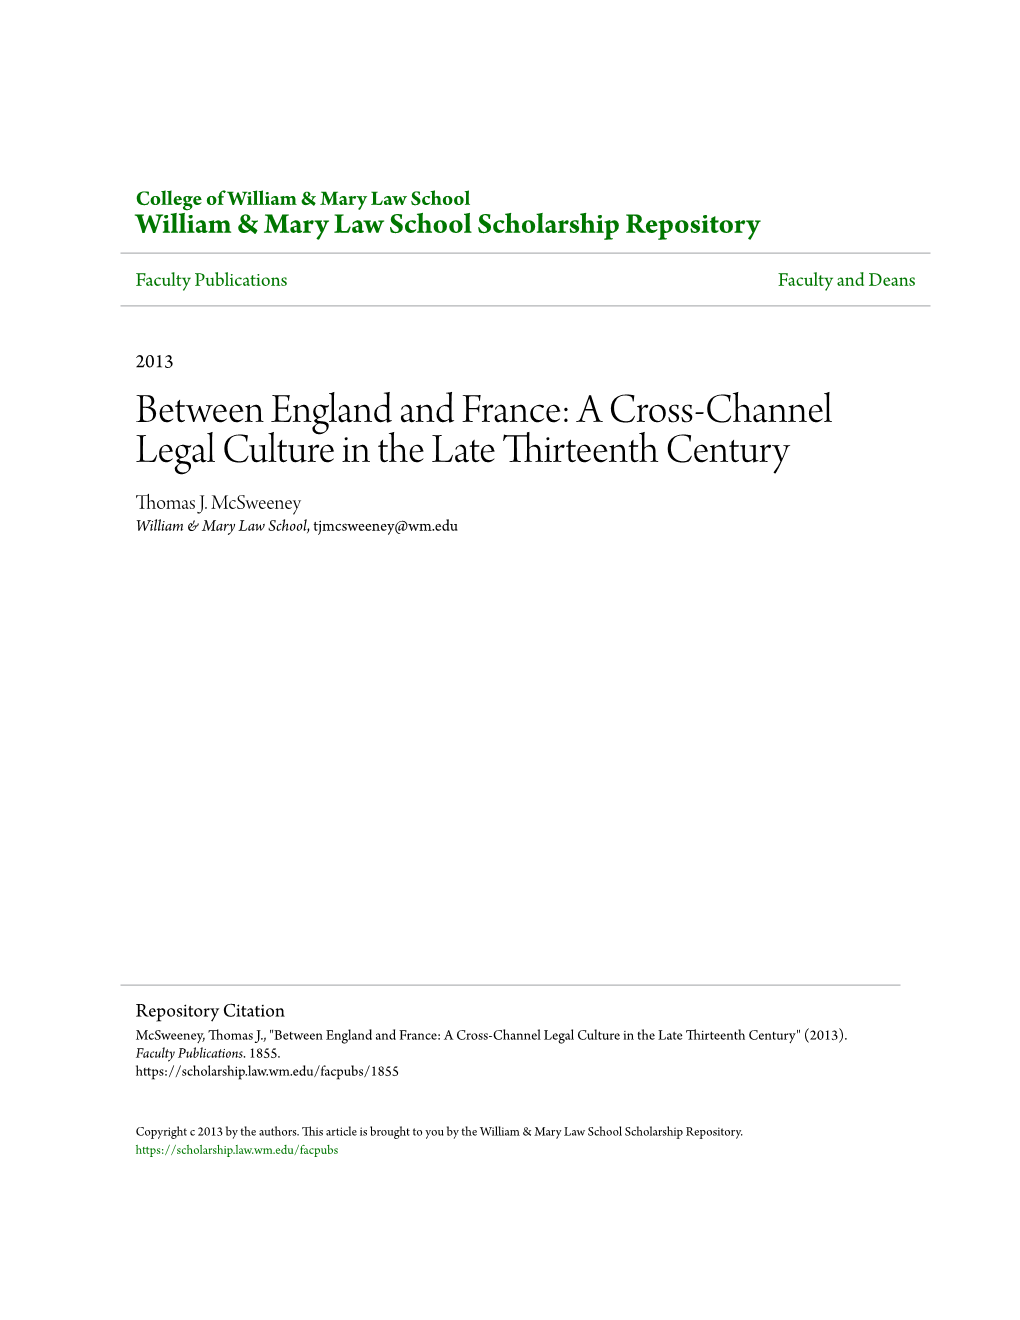 A Cross-Channel Legal Culture in the Late Thirteenth Century Thomas J